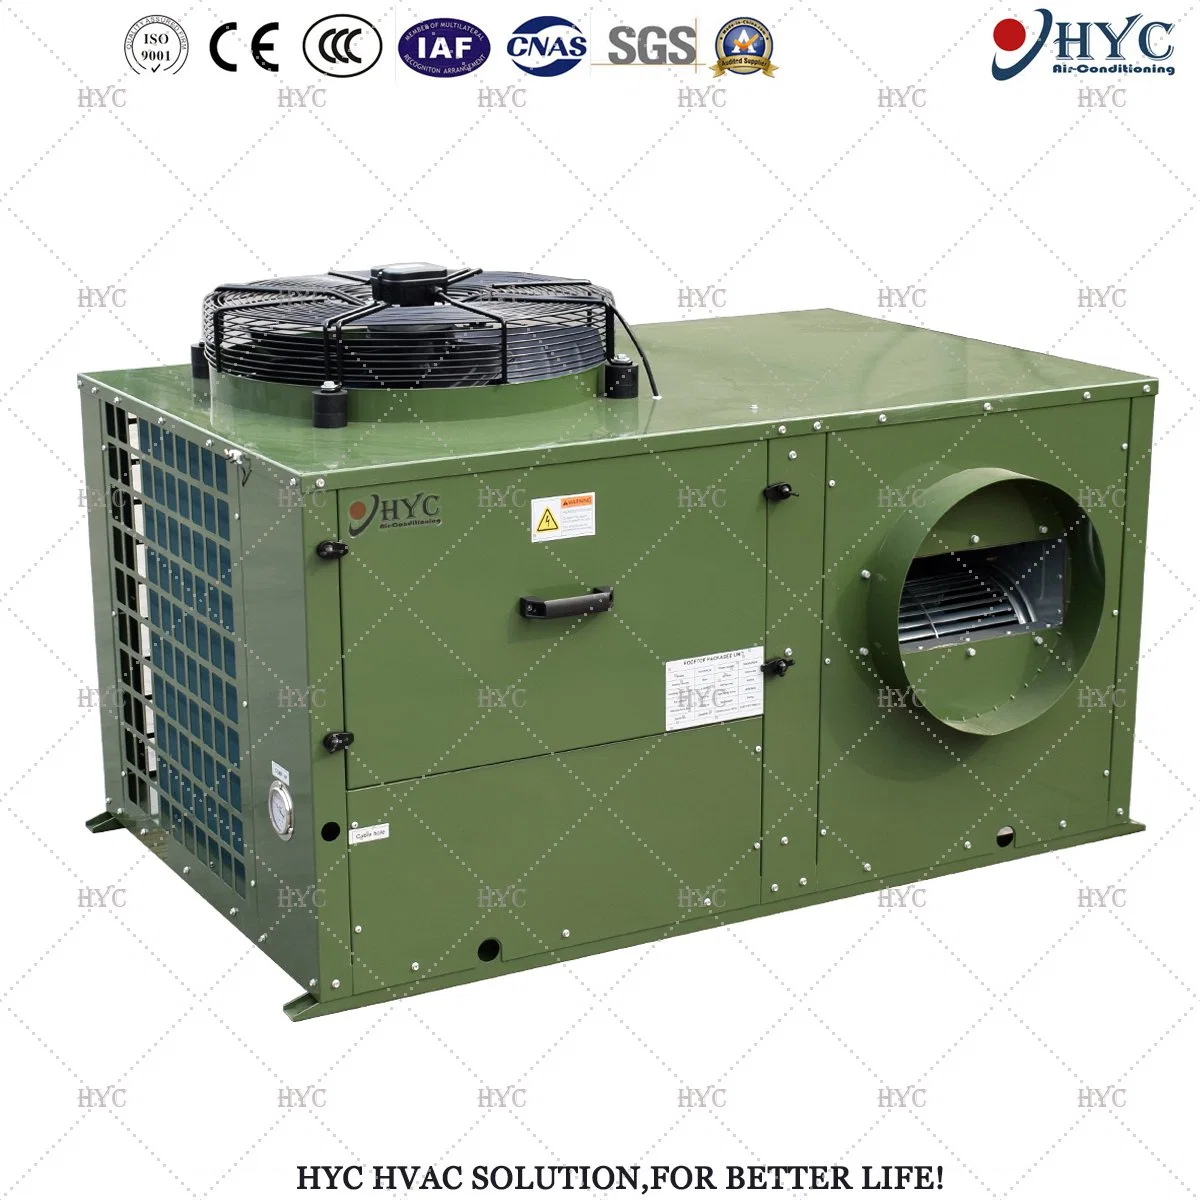 R410A Direct Expansion (DX) Rooftop Packaged Air Conditioning System